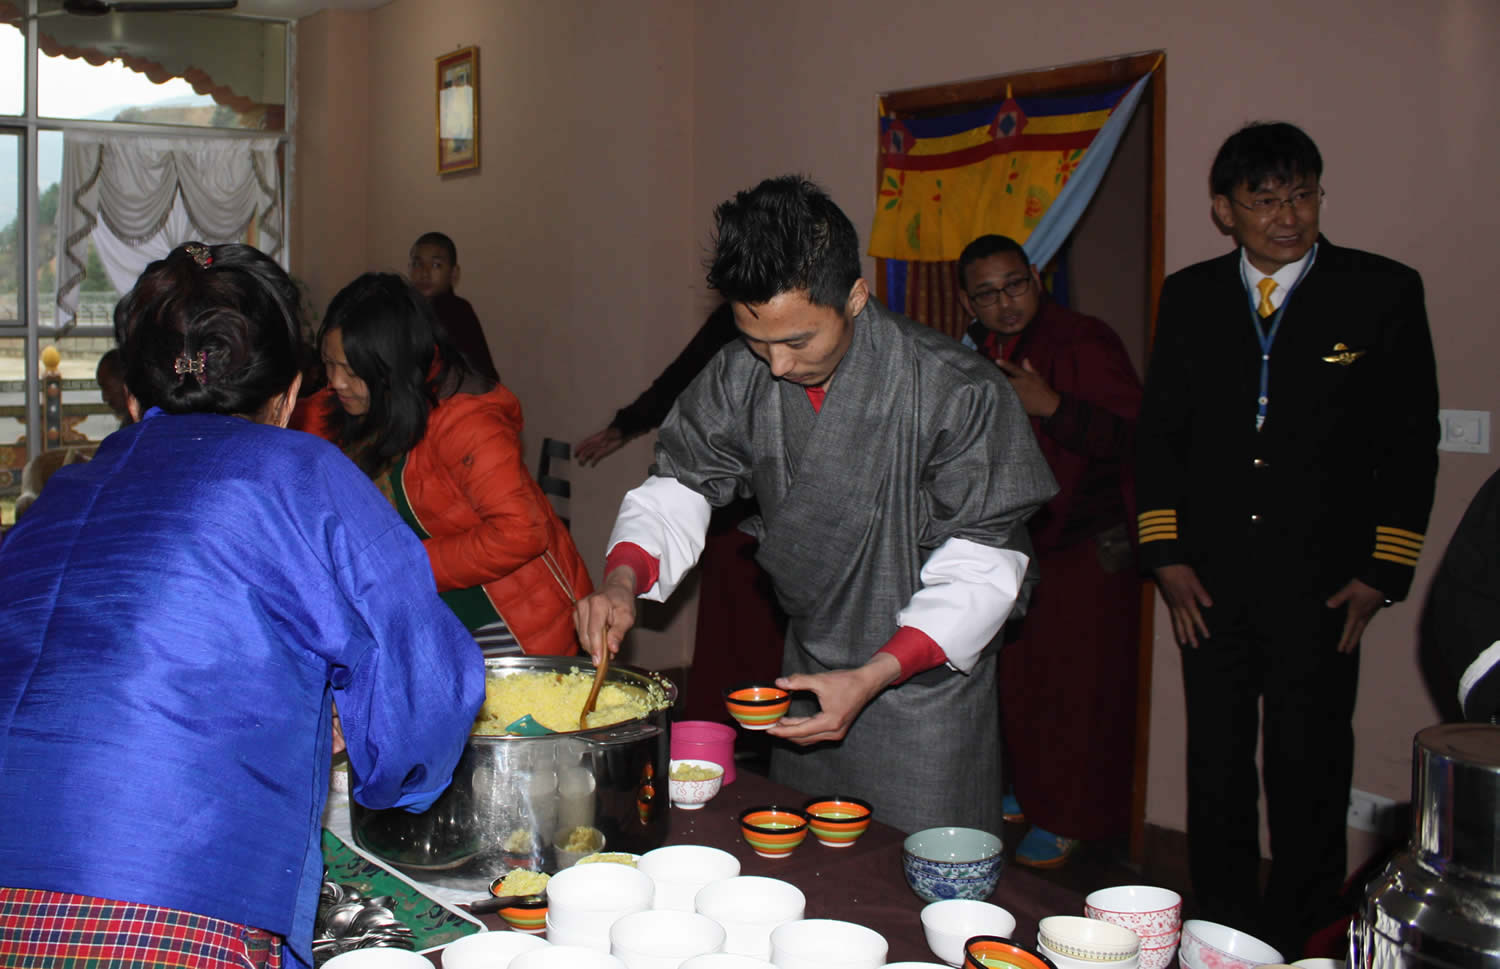 Upon arrival a traditional ceremony of tea and rice is offered to the Mindrolling Family by the family of Chönyid Choedron, one of the senior nuns of Samten Tse and a native Bhutanese.